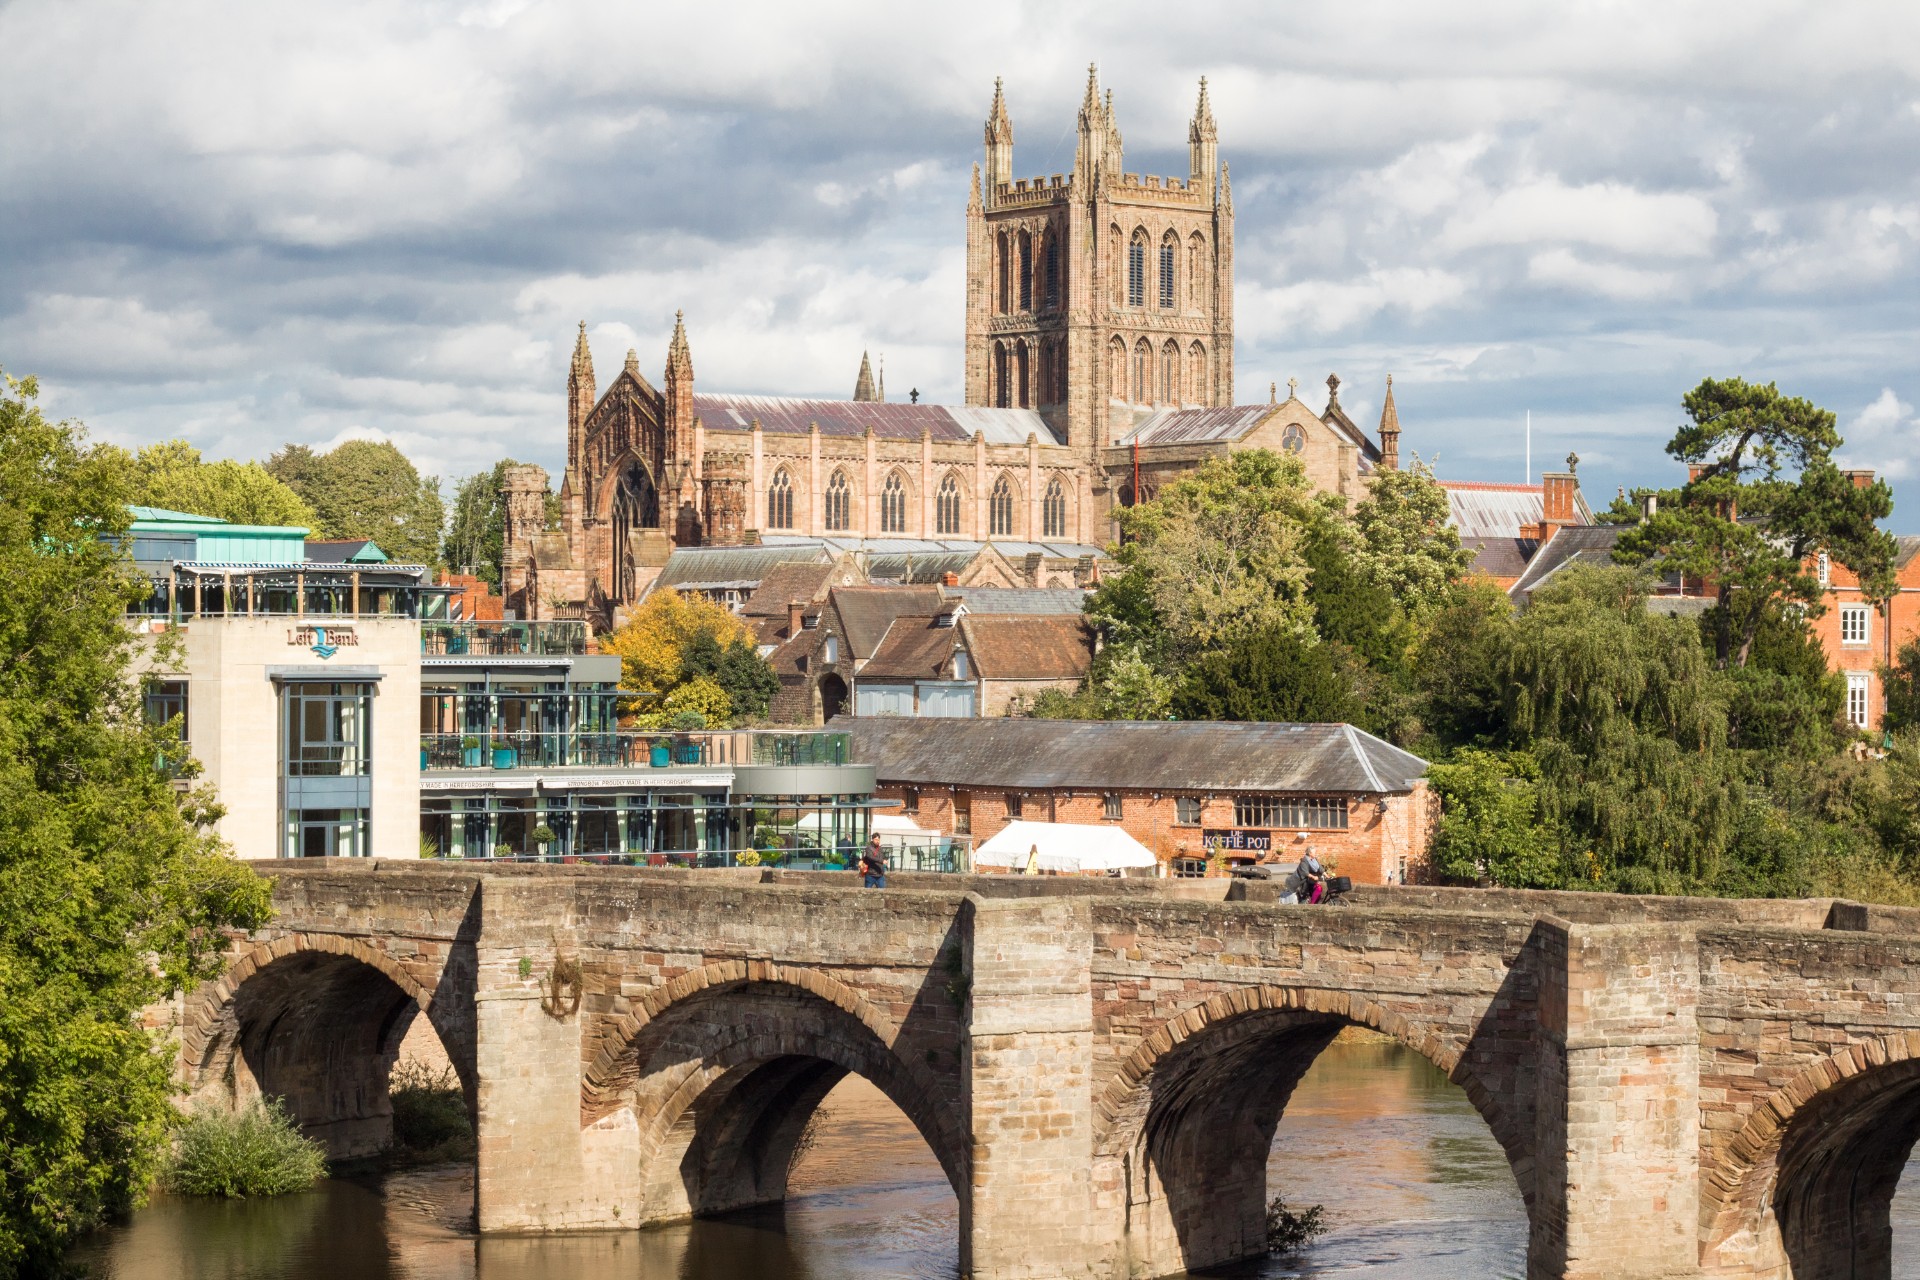 Hereford City Hereford Cathedral Bridge Restaurant Top 25 Things to Do in Herefordshire